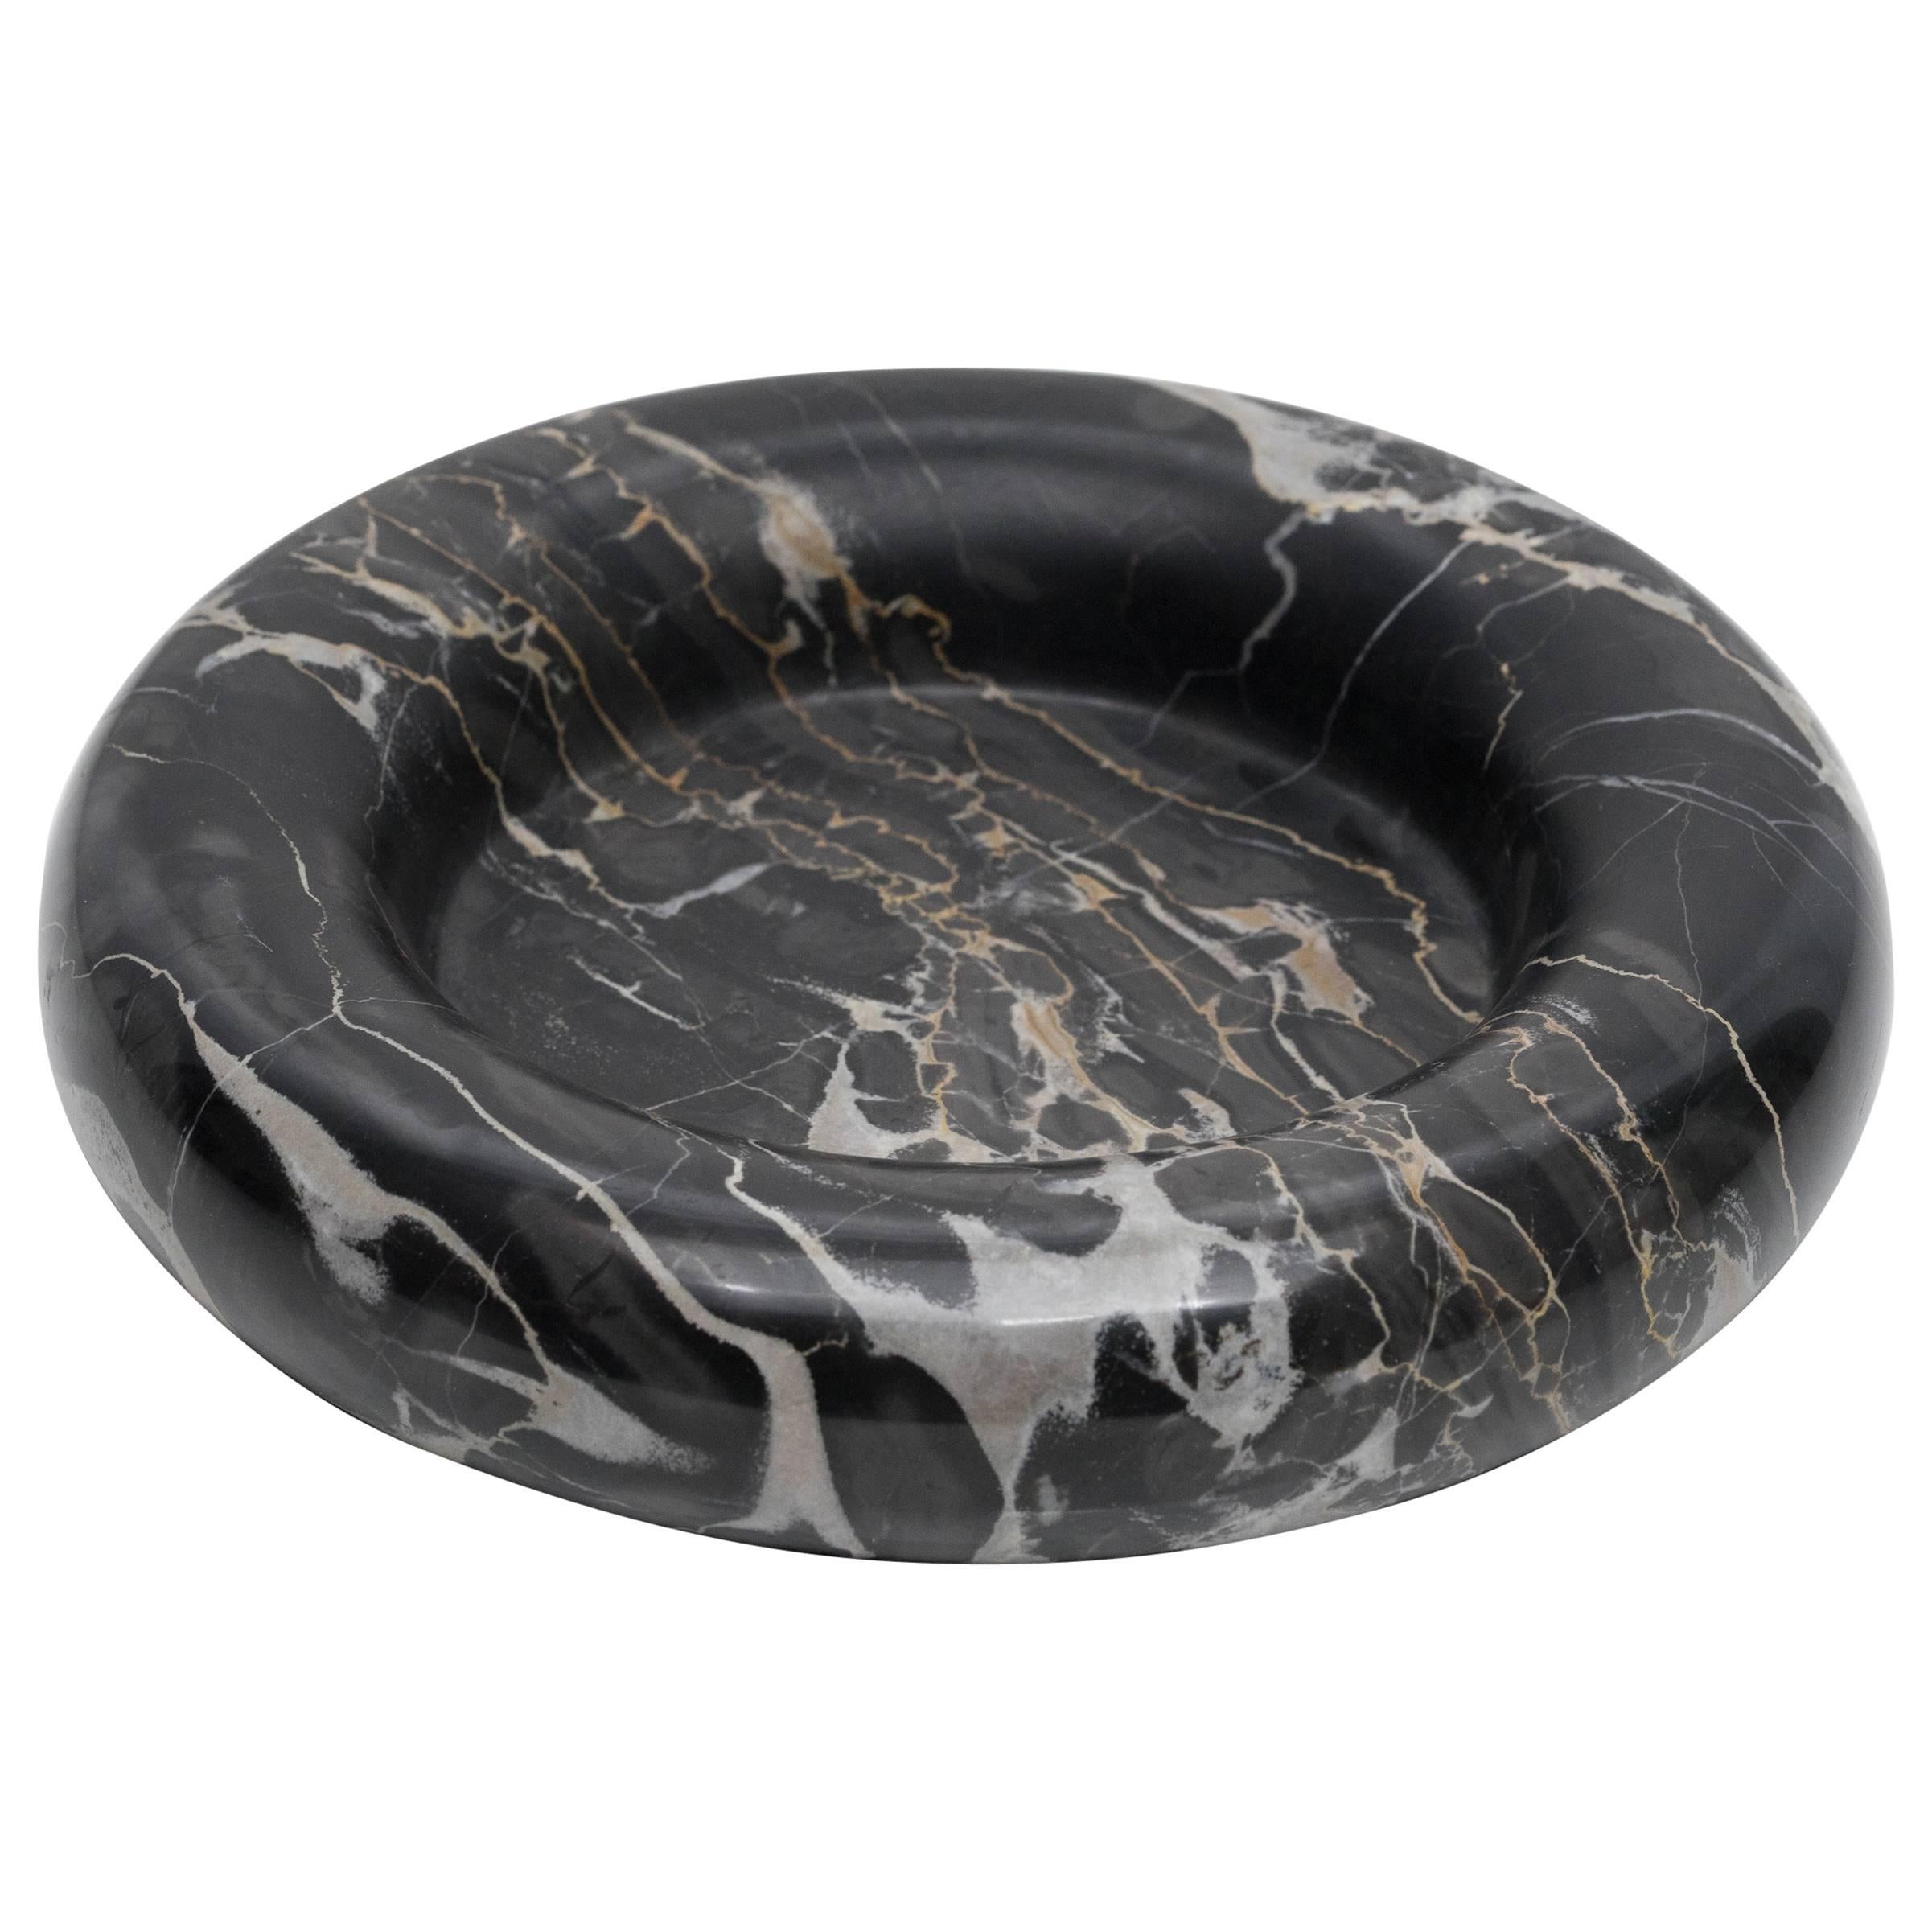 Large Black Marble Dish with Light Grey and Gold Veining by Up & Up, 1973